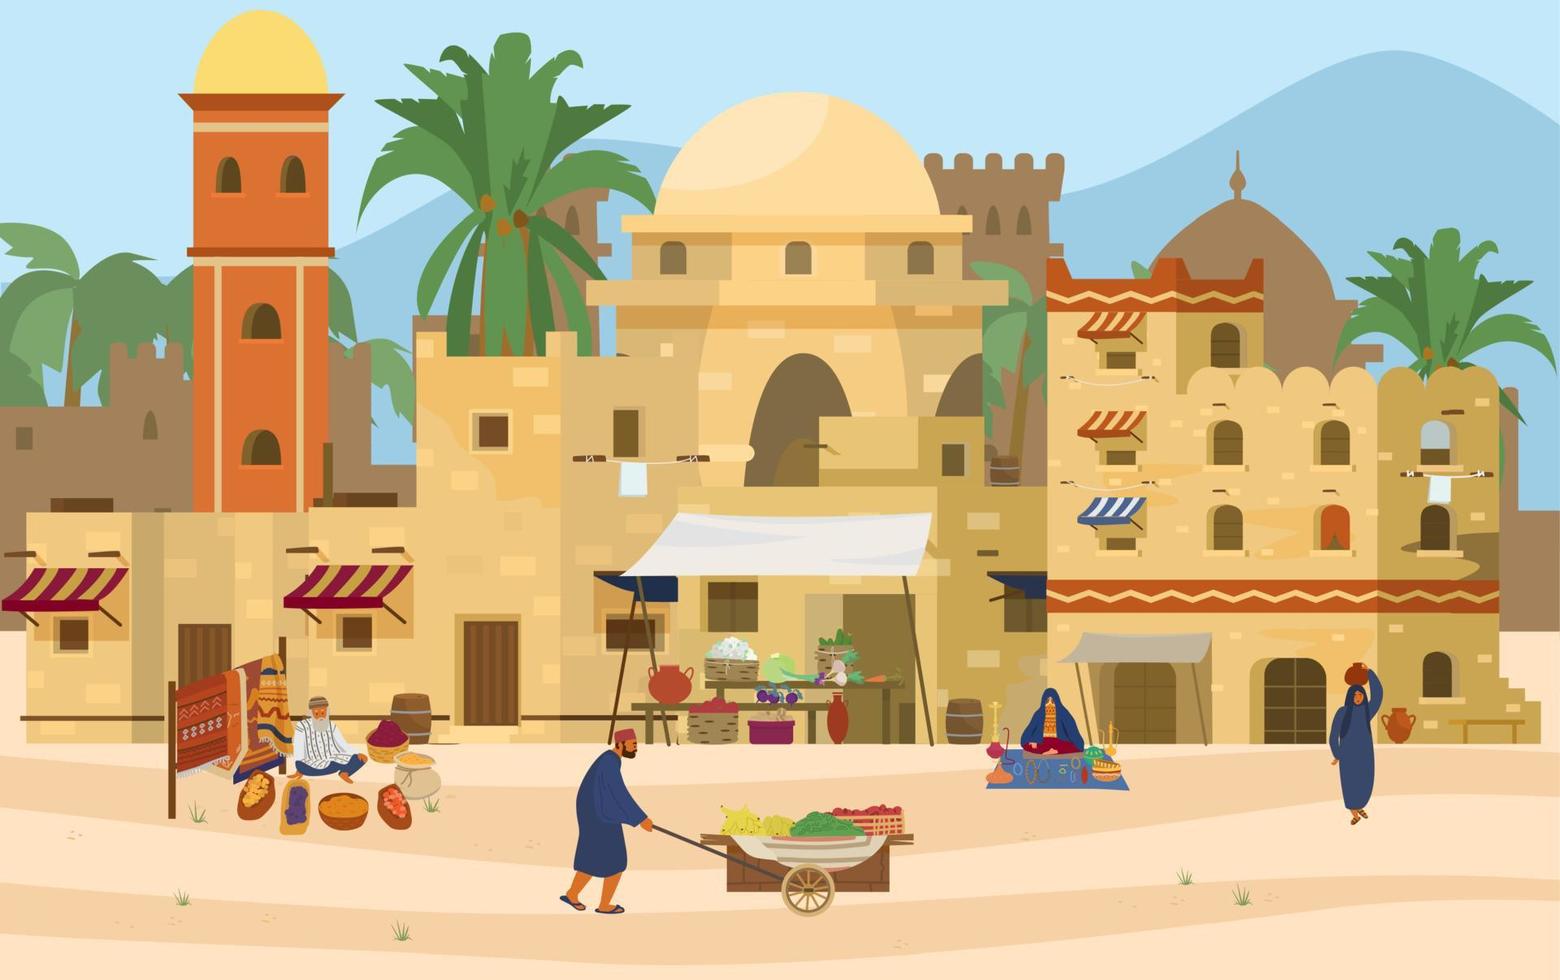 Vector illustration of Middle Eastern scene. Arabic Ancient City with traditional mud brick houses and people. Asian Bazaar With Carpets, Spices, Fruits And Vegetables.